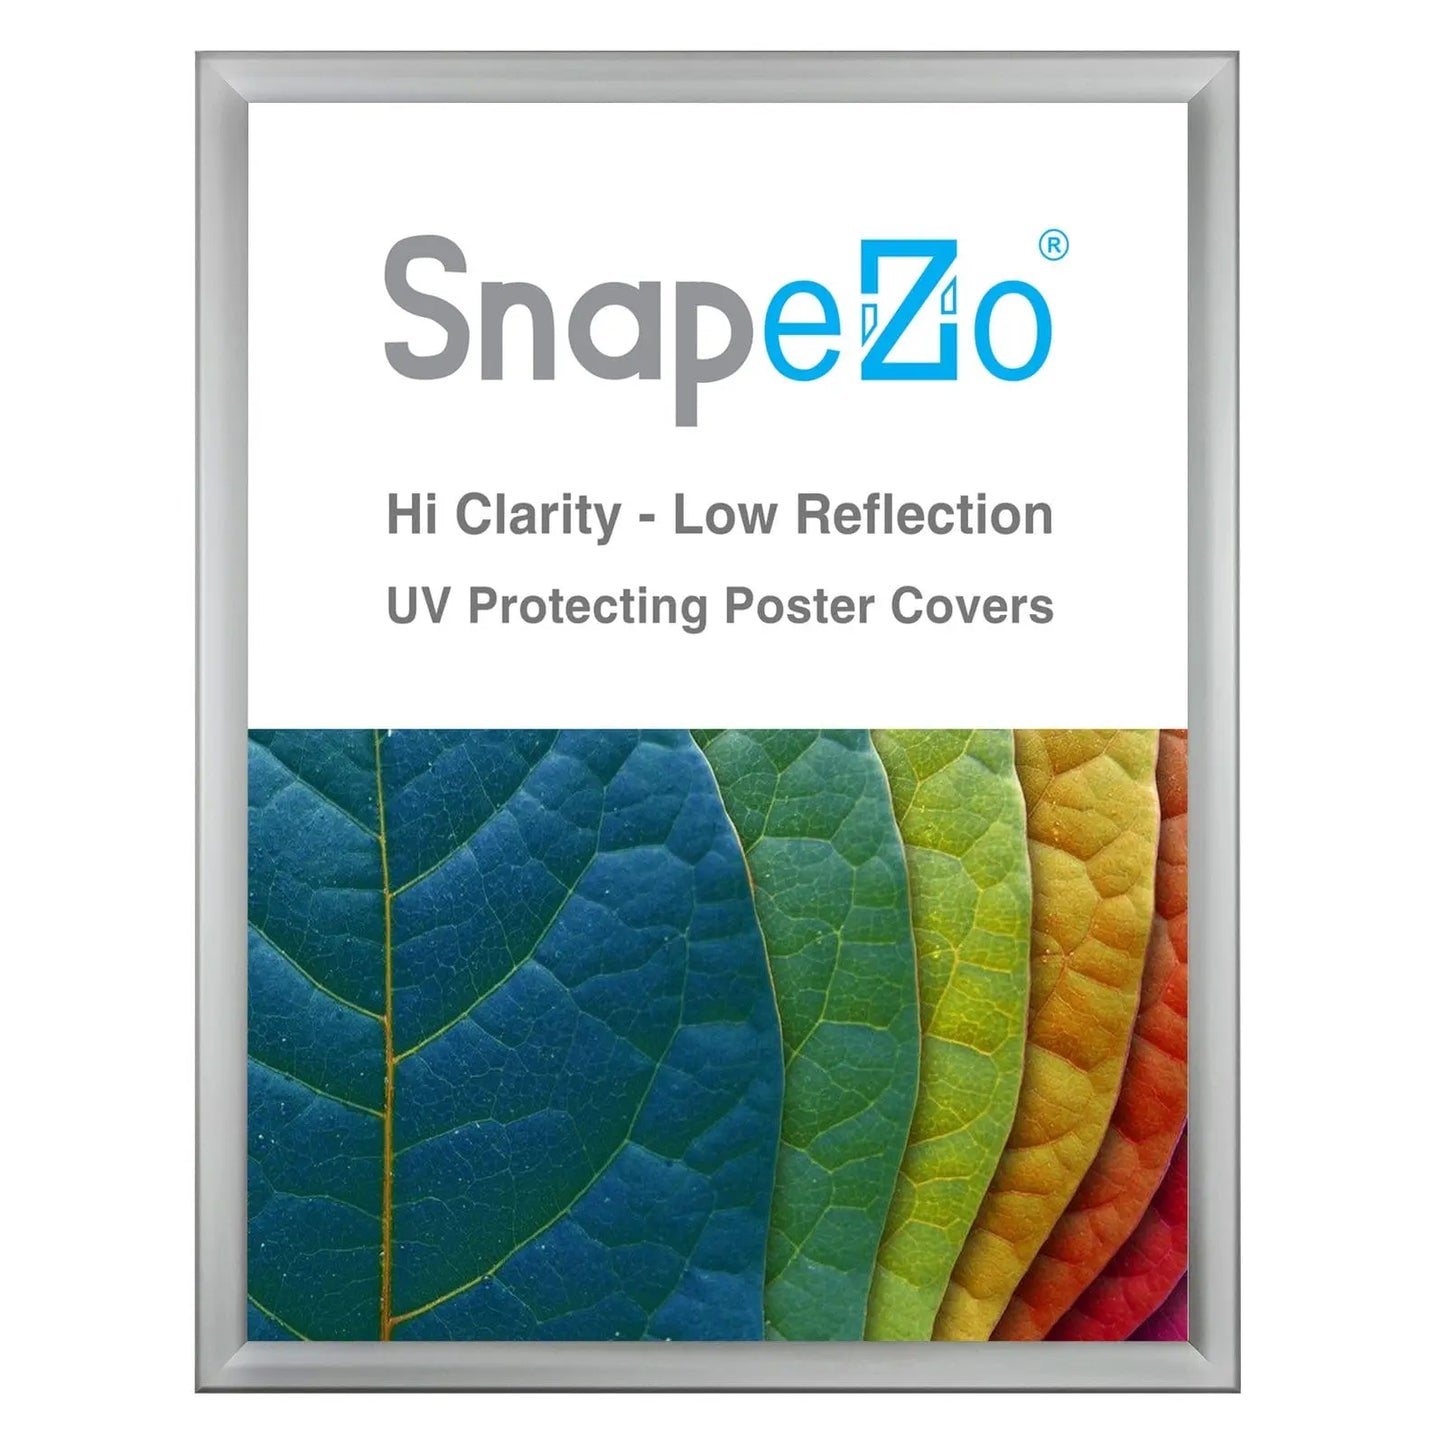 22x28 Silver SnapeZo® Weather Resistant - 1.38" Profile - Snap Frames Direct